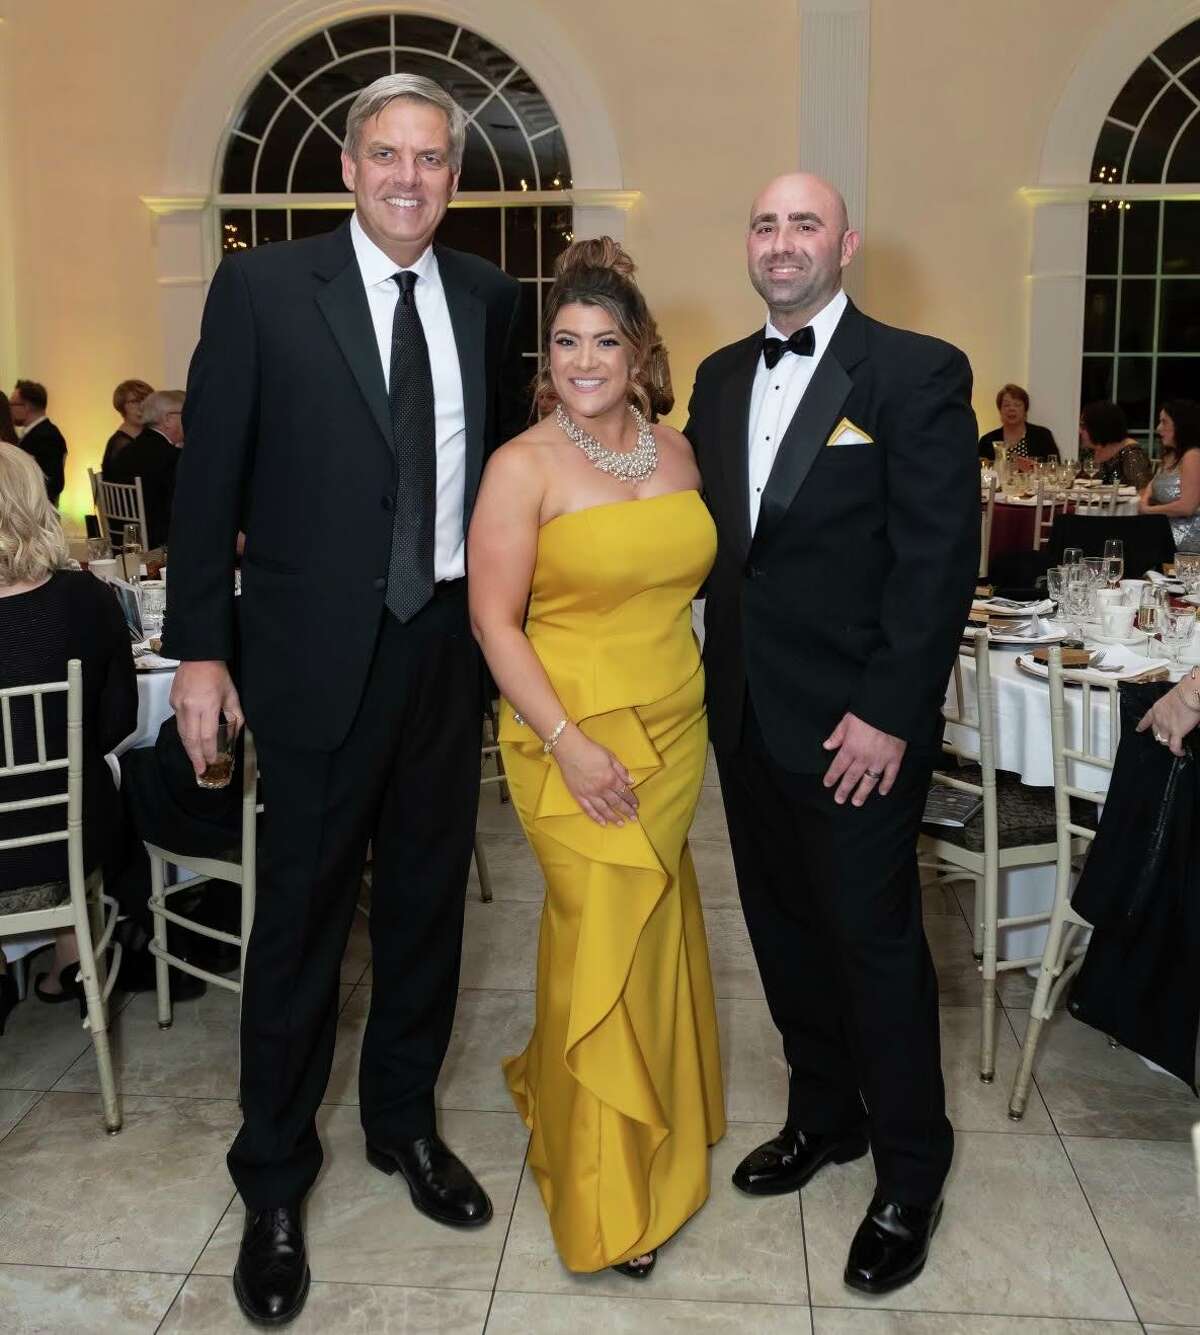 New Britain Mayor Erin Stewart, center, at her 5th inaugural ball Saturday night, Feb. 12 at the Aqua Turf in Southington with Bob Stefanowski, left, the likely 2022 Republican nominee for governor and her husband, Domenic Mutone, right. Stewart uses the name Stewart-Mutone in her personal life but remains Stewart in politics.